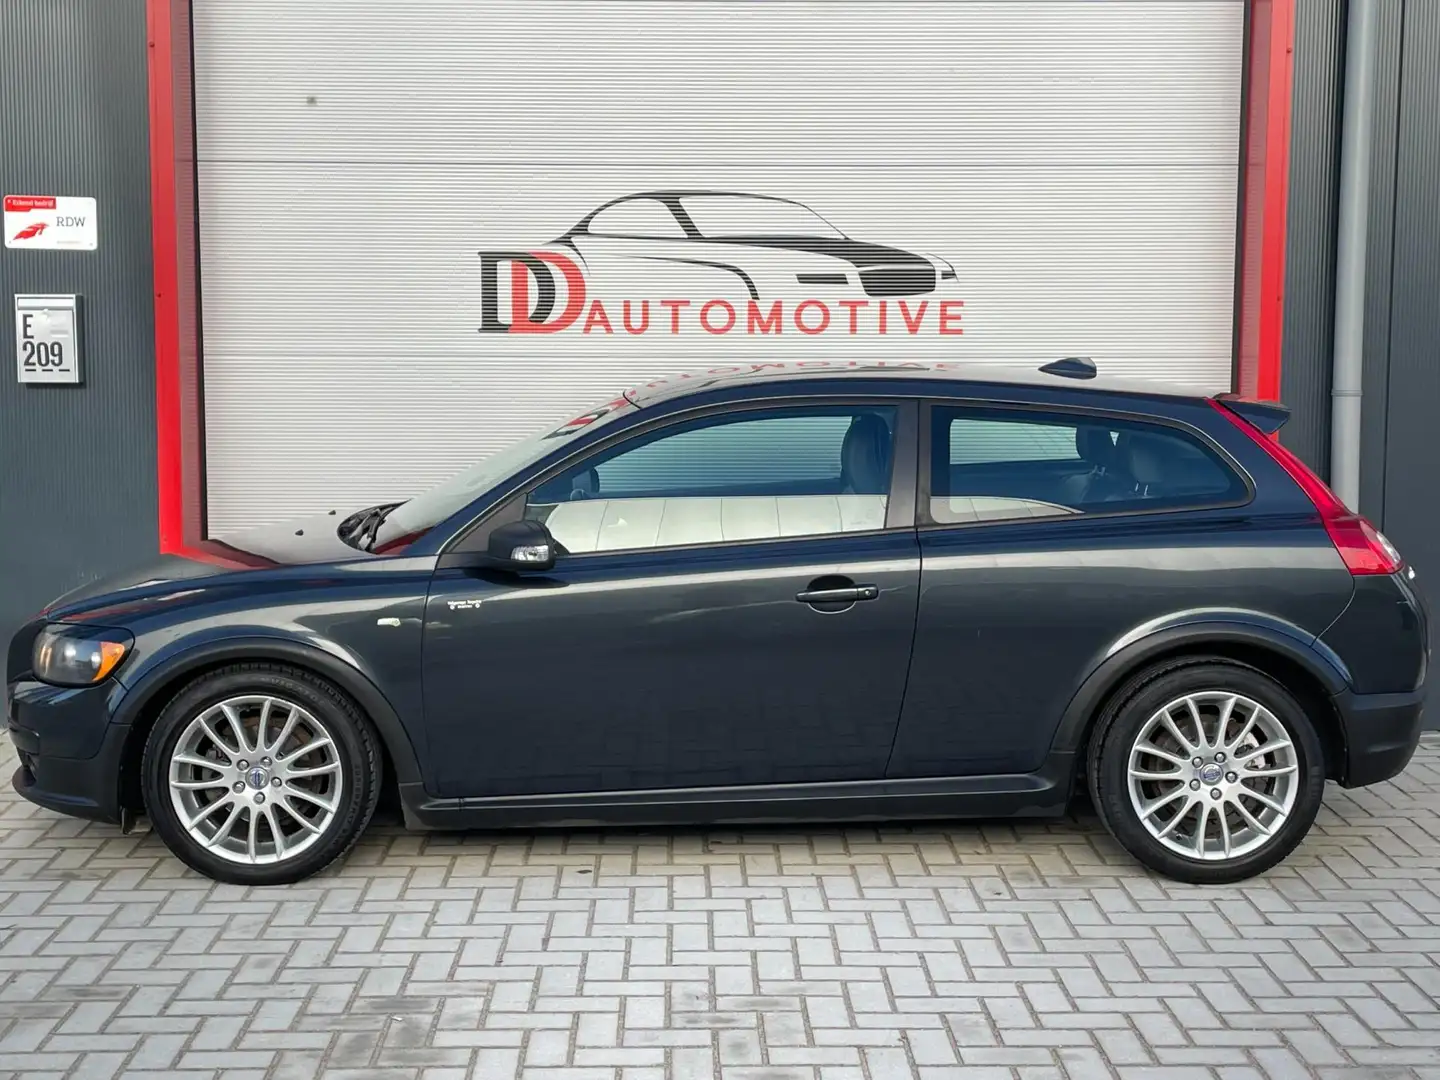 Volvo C30 1.6D DRIVe Sport LEER/PDC/CRUISE/DEALEROH/NAP/ORGN Gri - 2